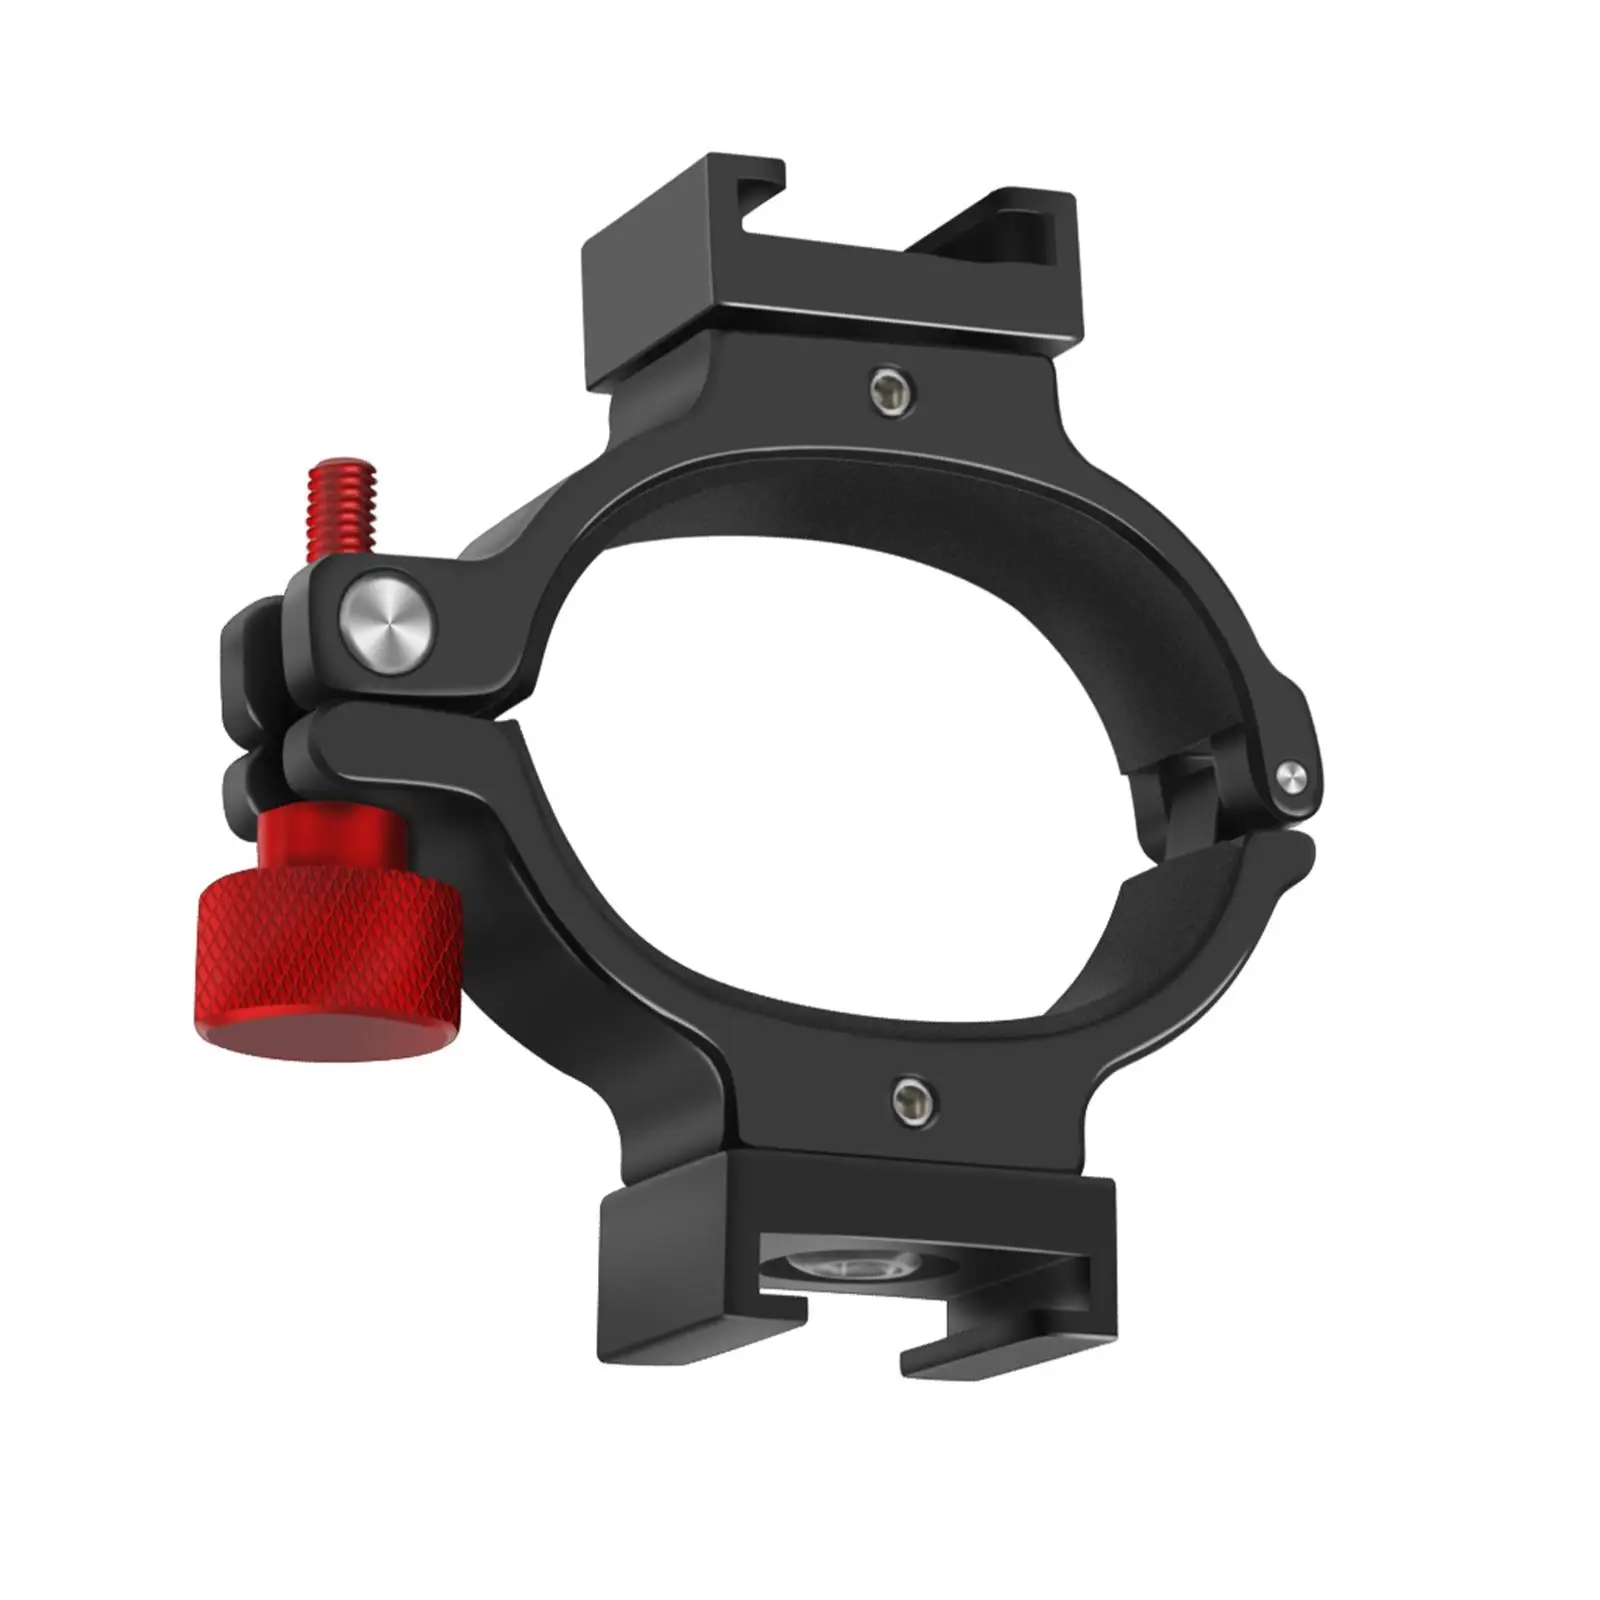 Extension Adaptor Rack Stabilizer Bracket 360 Degrees Rotation Fixing Thread Hole Adjustable The Shoe Mount for Audio Osmo2/3/4